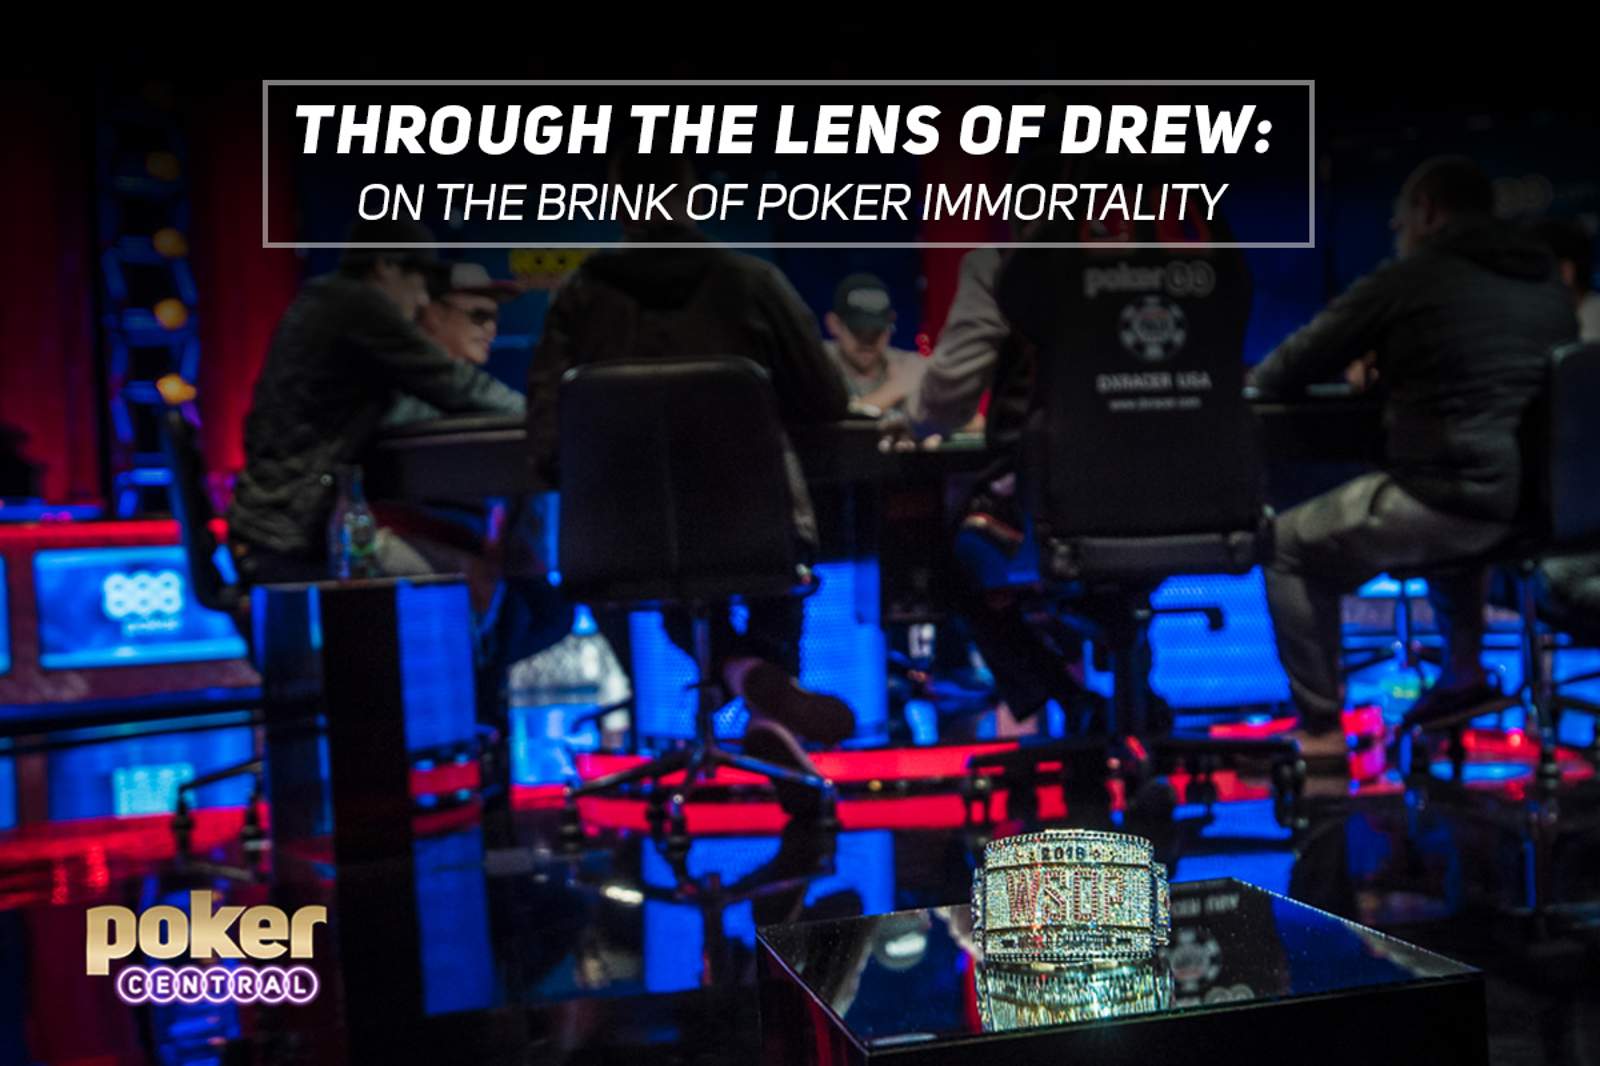 Through The Lens of Drew - On The Brink of Poker Immortality